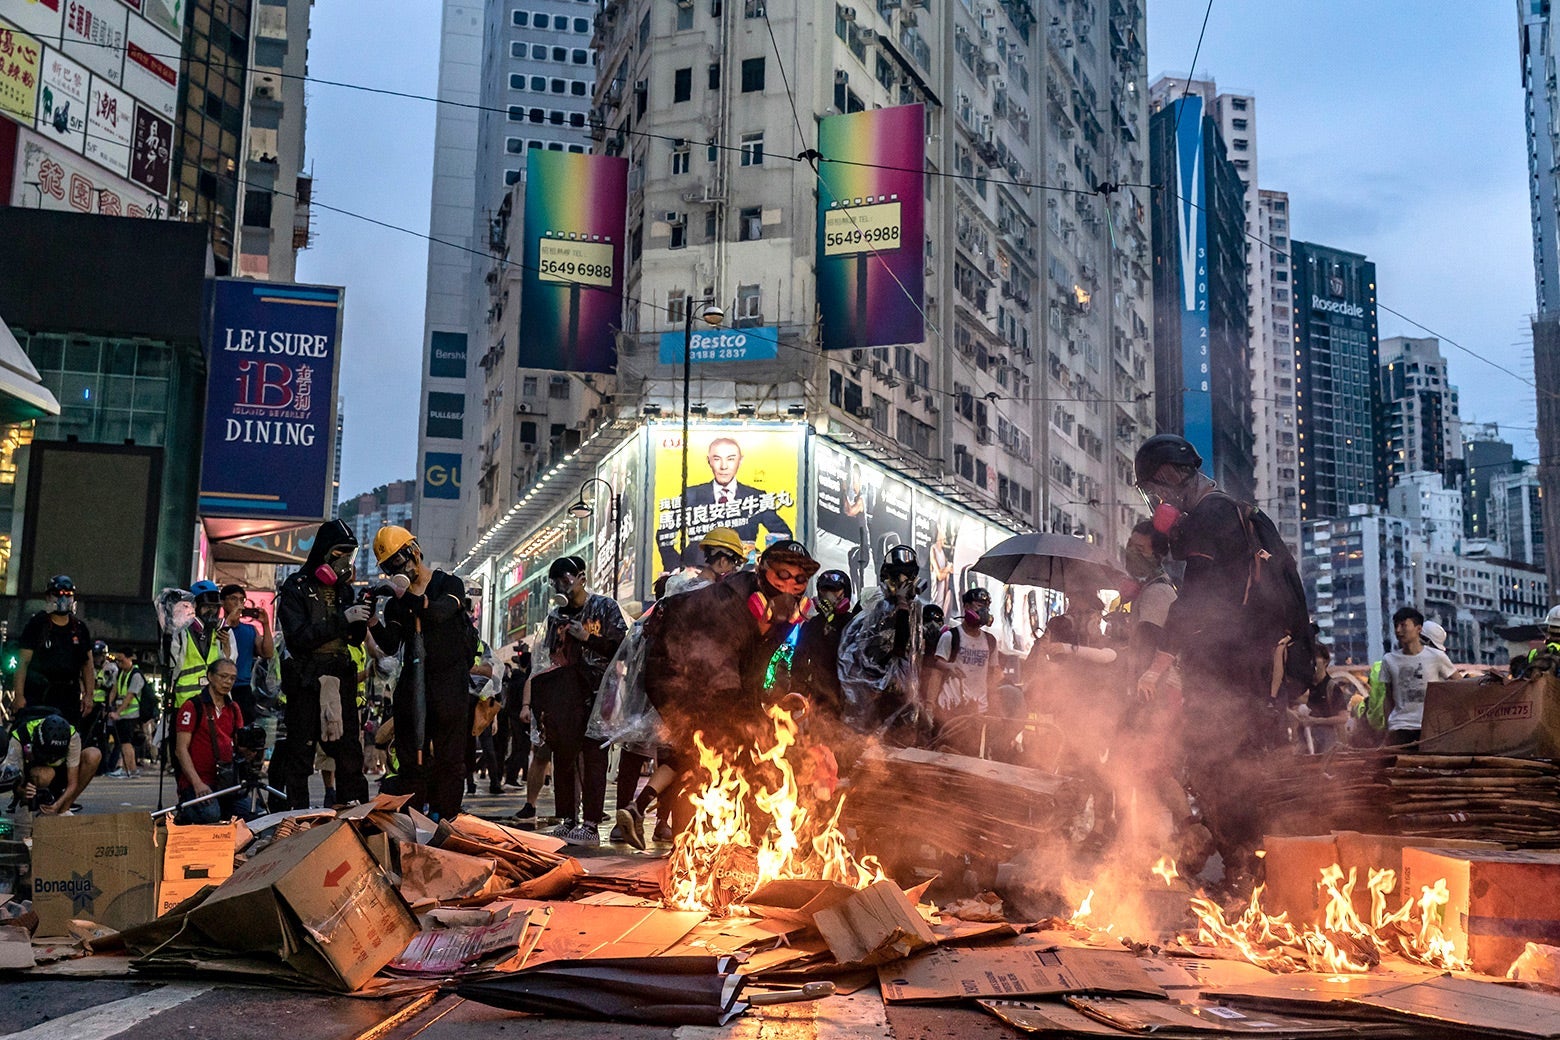 Protesters set barricade on fire at a demonstration in Hong Kong.